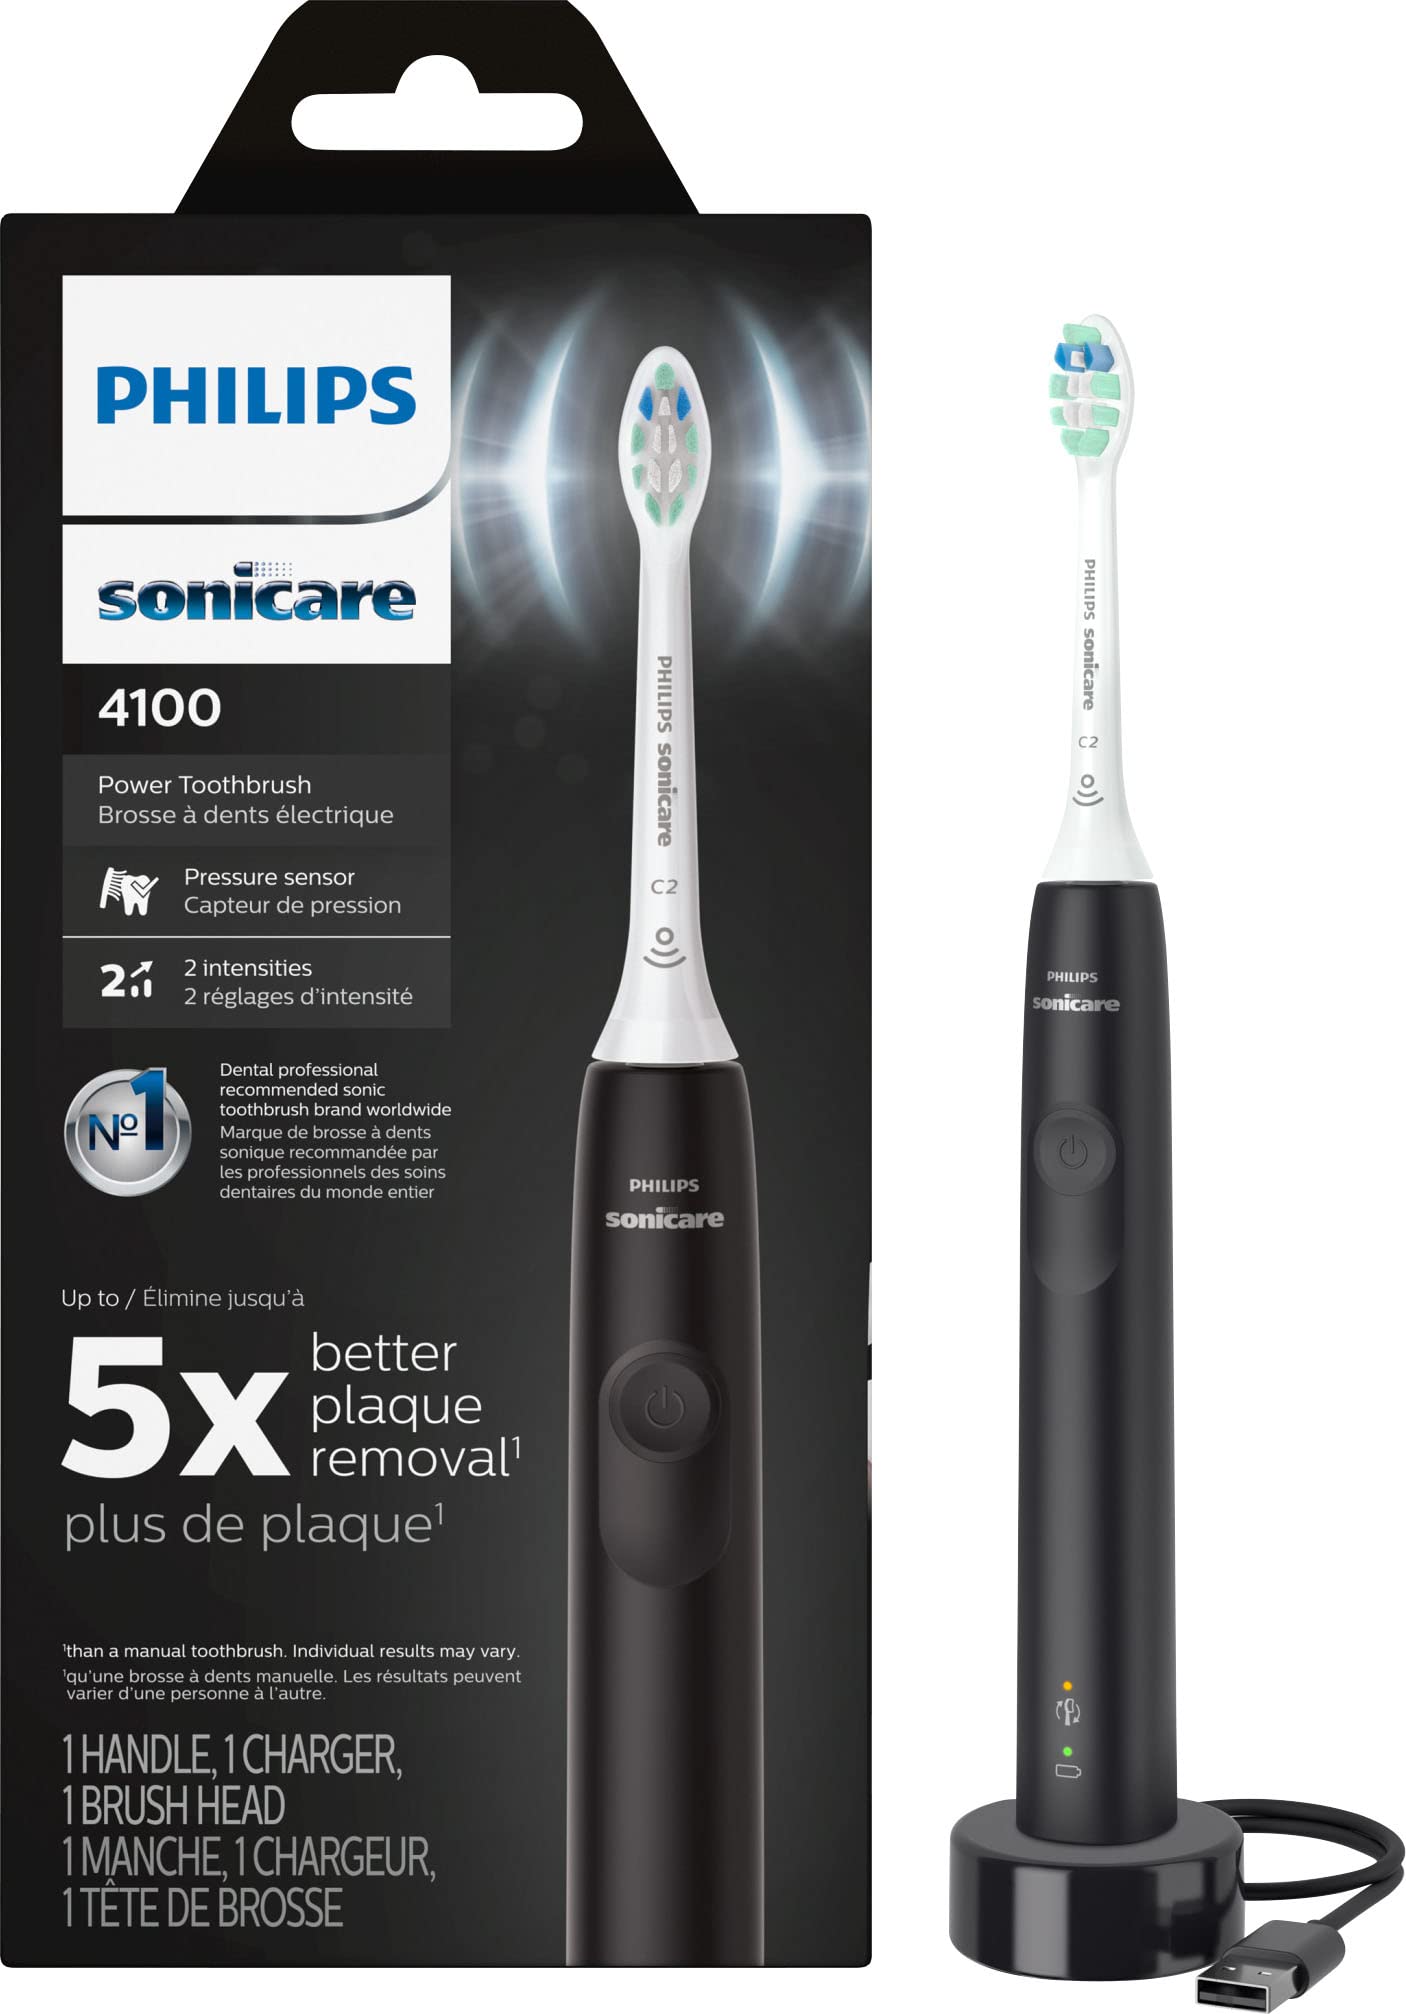 Philips Sonicare Electric Toothbrush Power Toothbrush Electric, Toothbrush Rechargeable Electric Toothbrush with Pressure Sensor